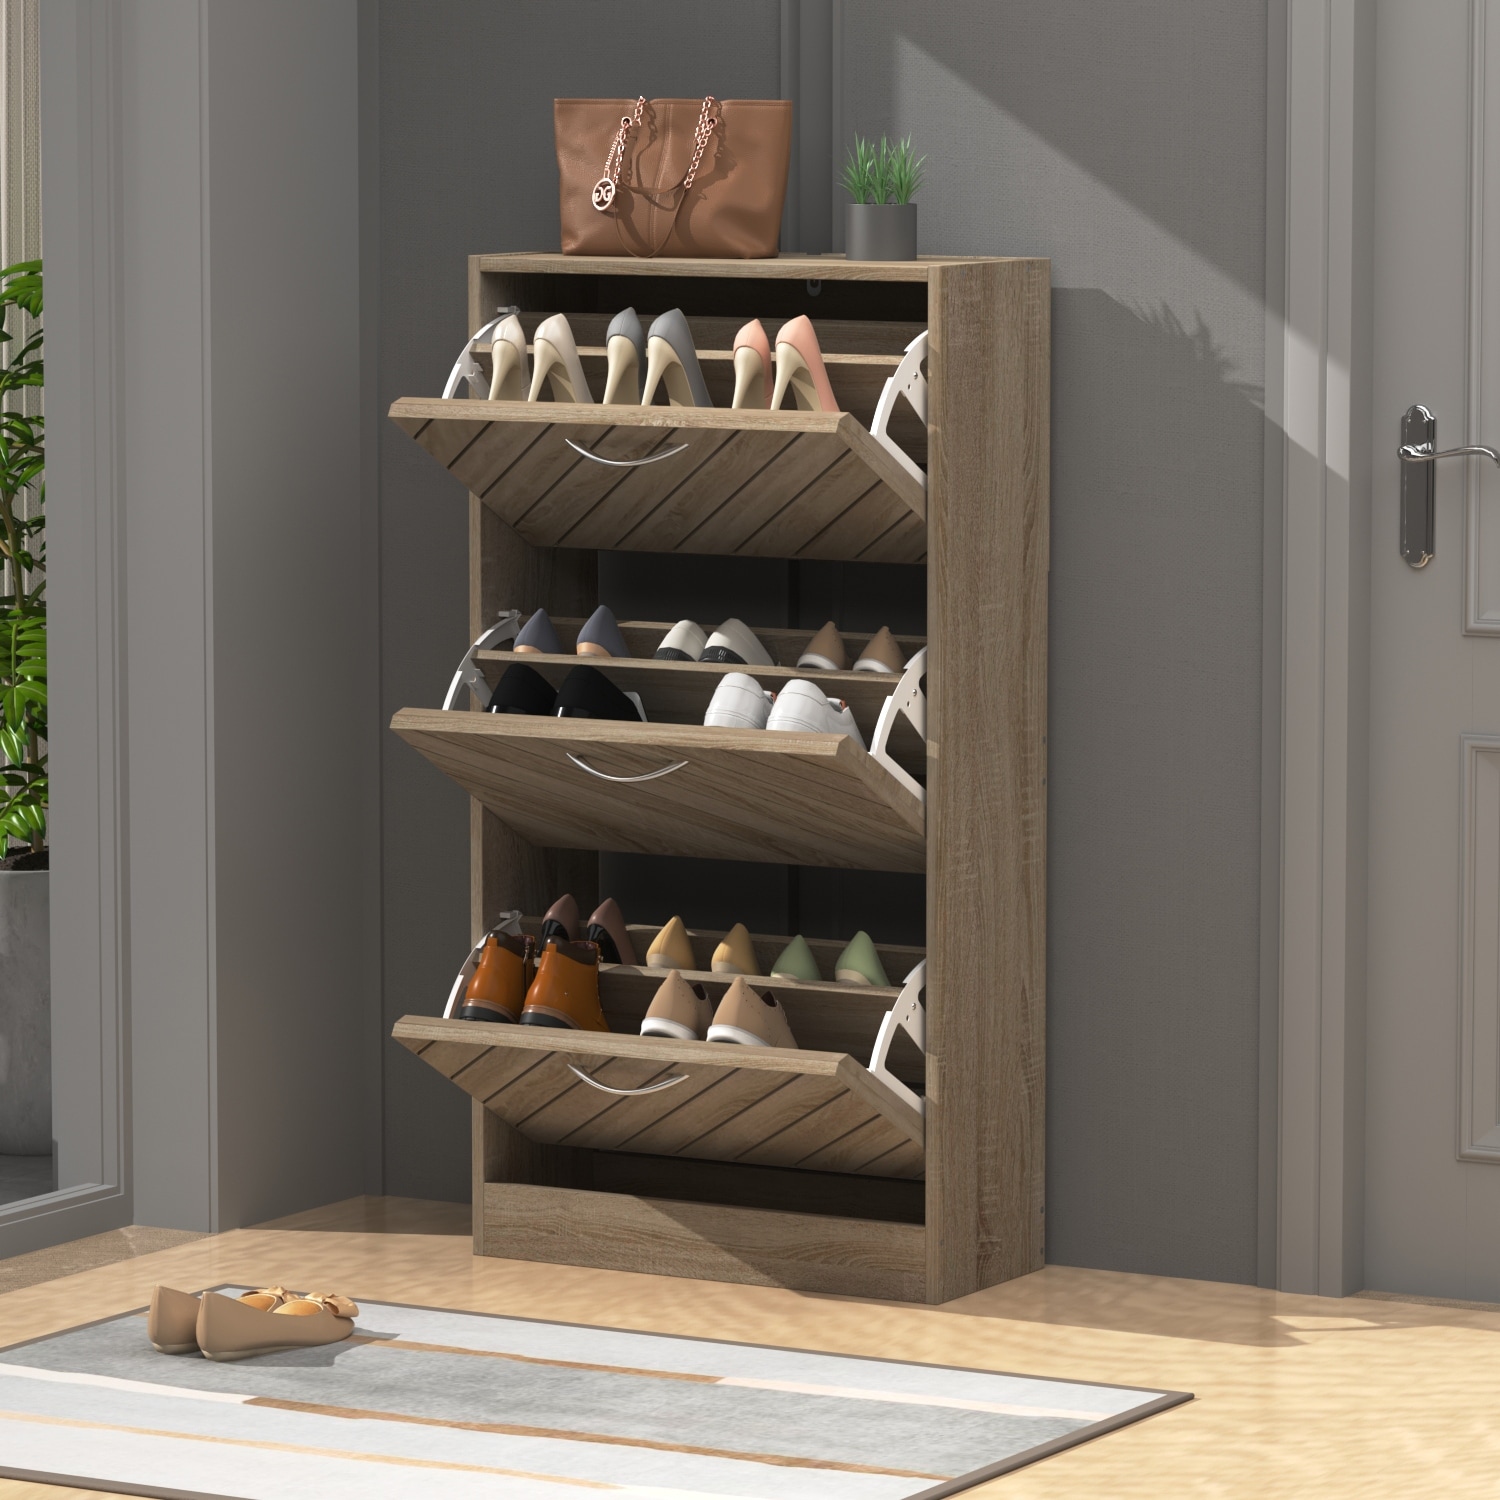 https://ak1.ostkcdn.com/images/products/is/images/direct/31aa901dc3dbe66d59ea8adc52f1ccc3c94edec0/22.4%22-Shoe-Storage-Cabinet-with-3-Flip-Drawers-Wood--Grey-by-Kerrogee.jpg